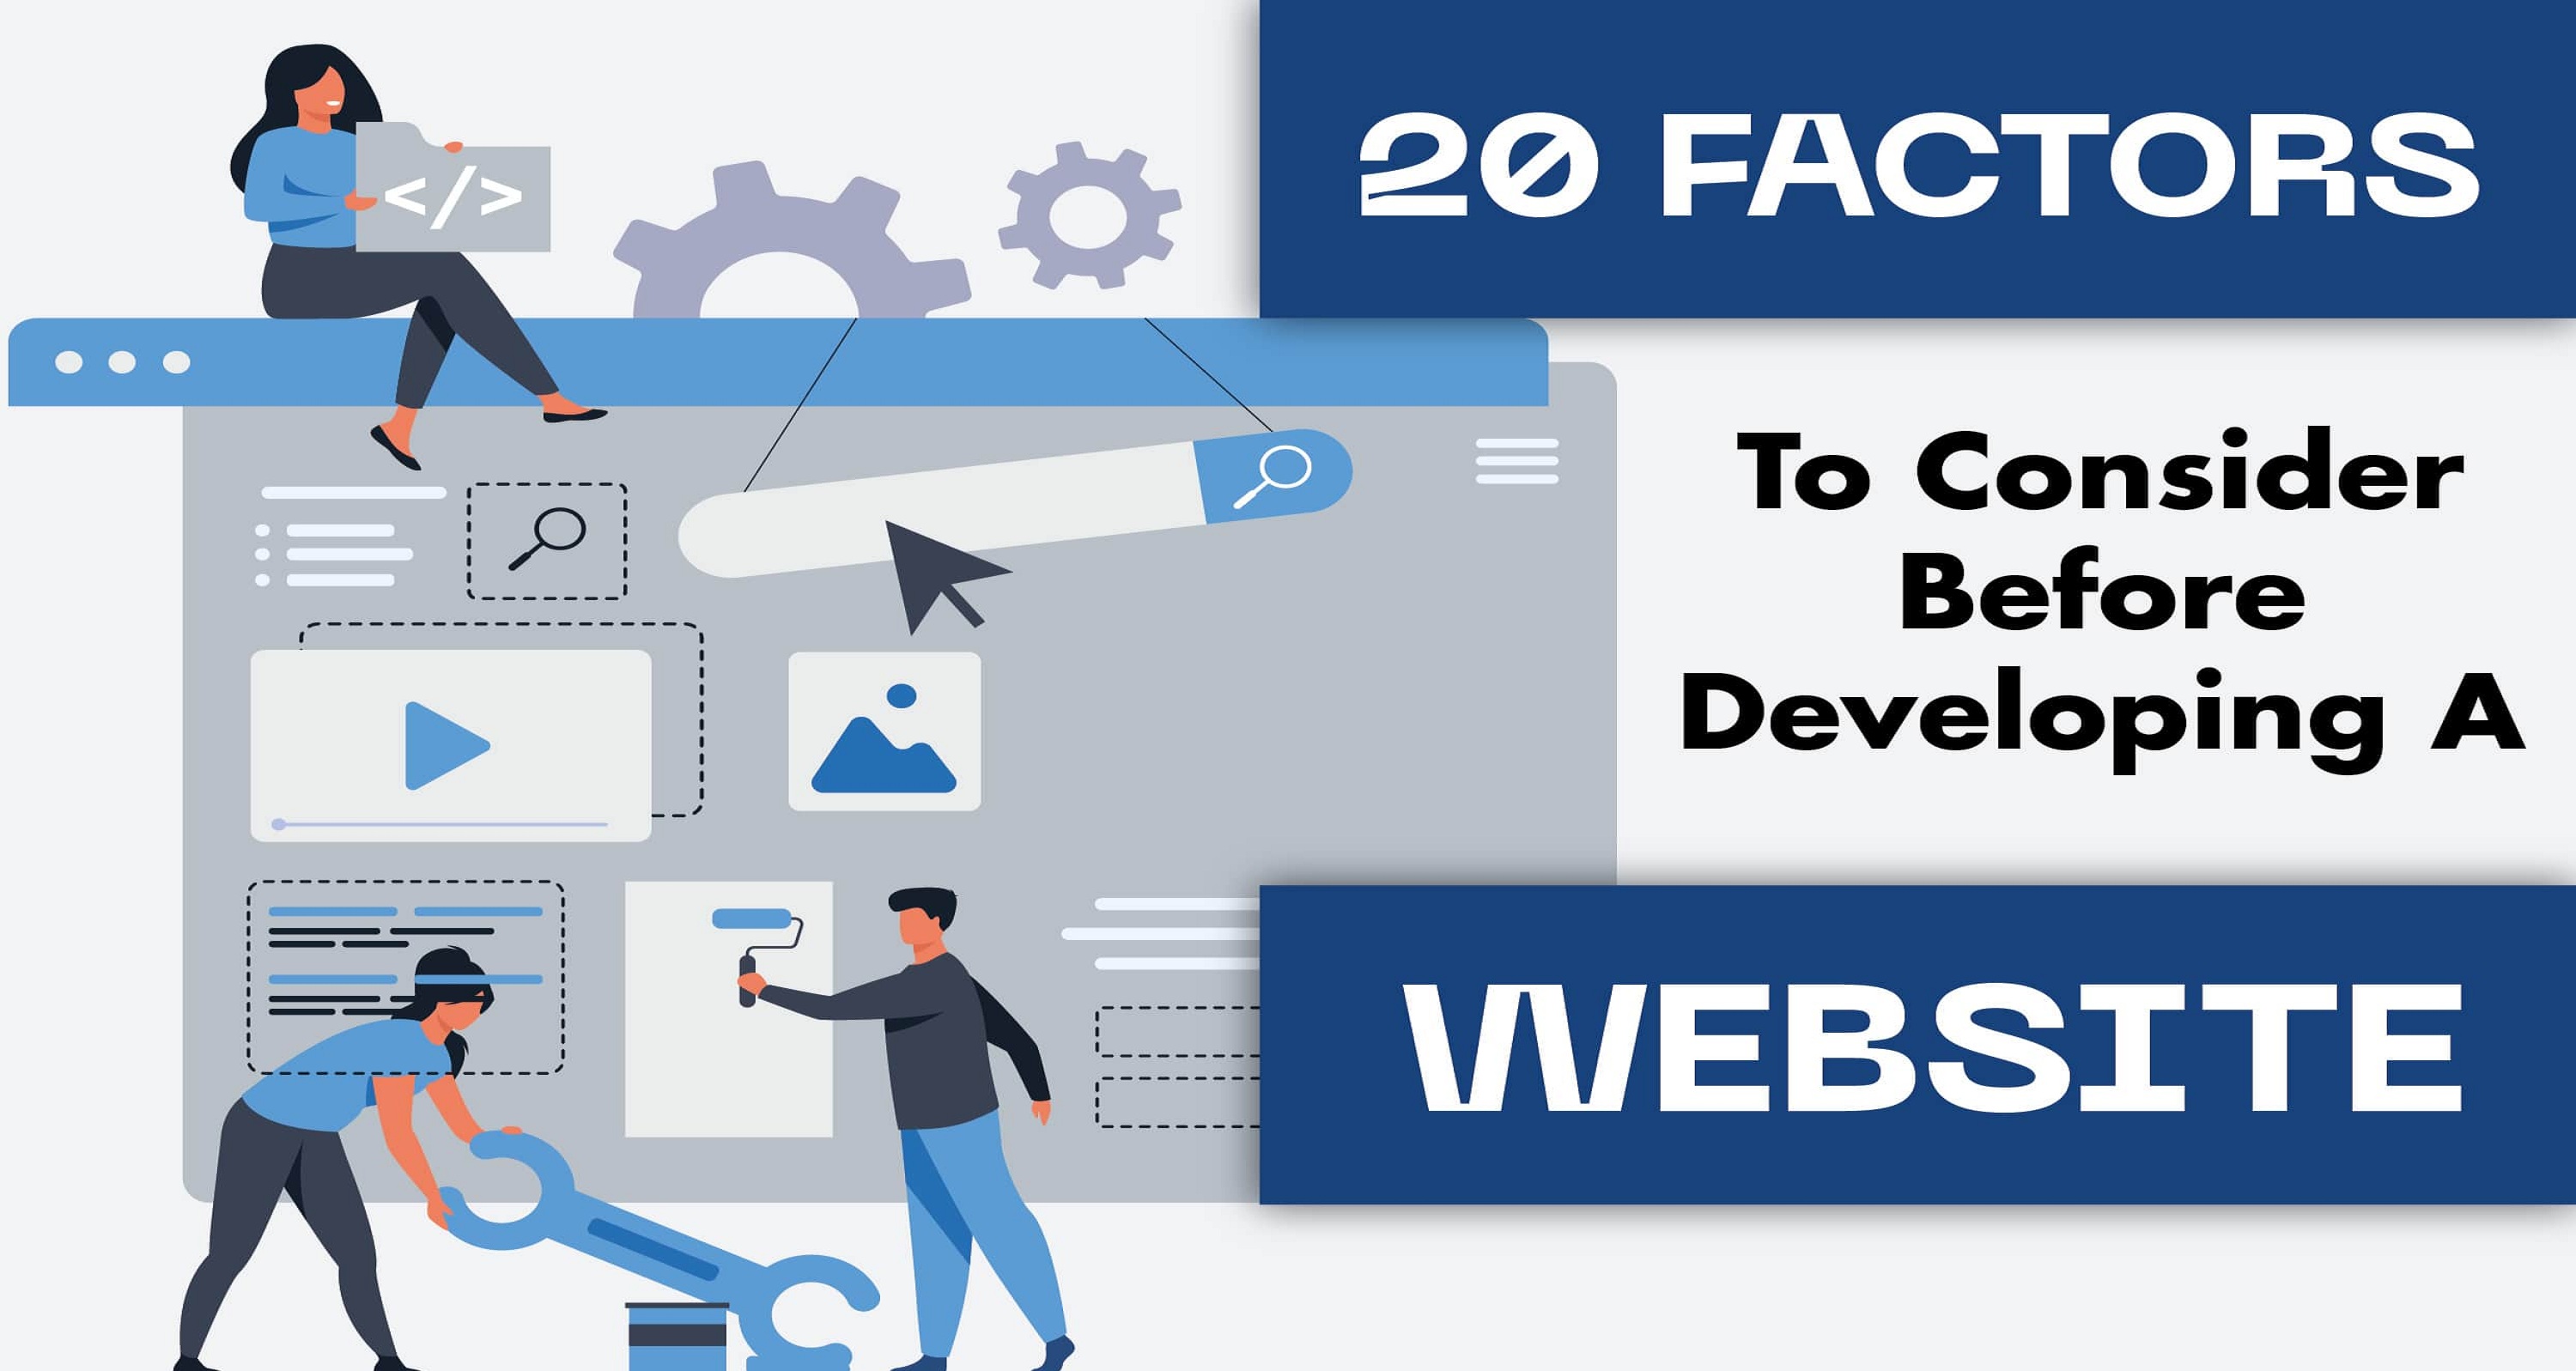 20 Factors To Consider Before Developing A Website